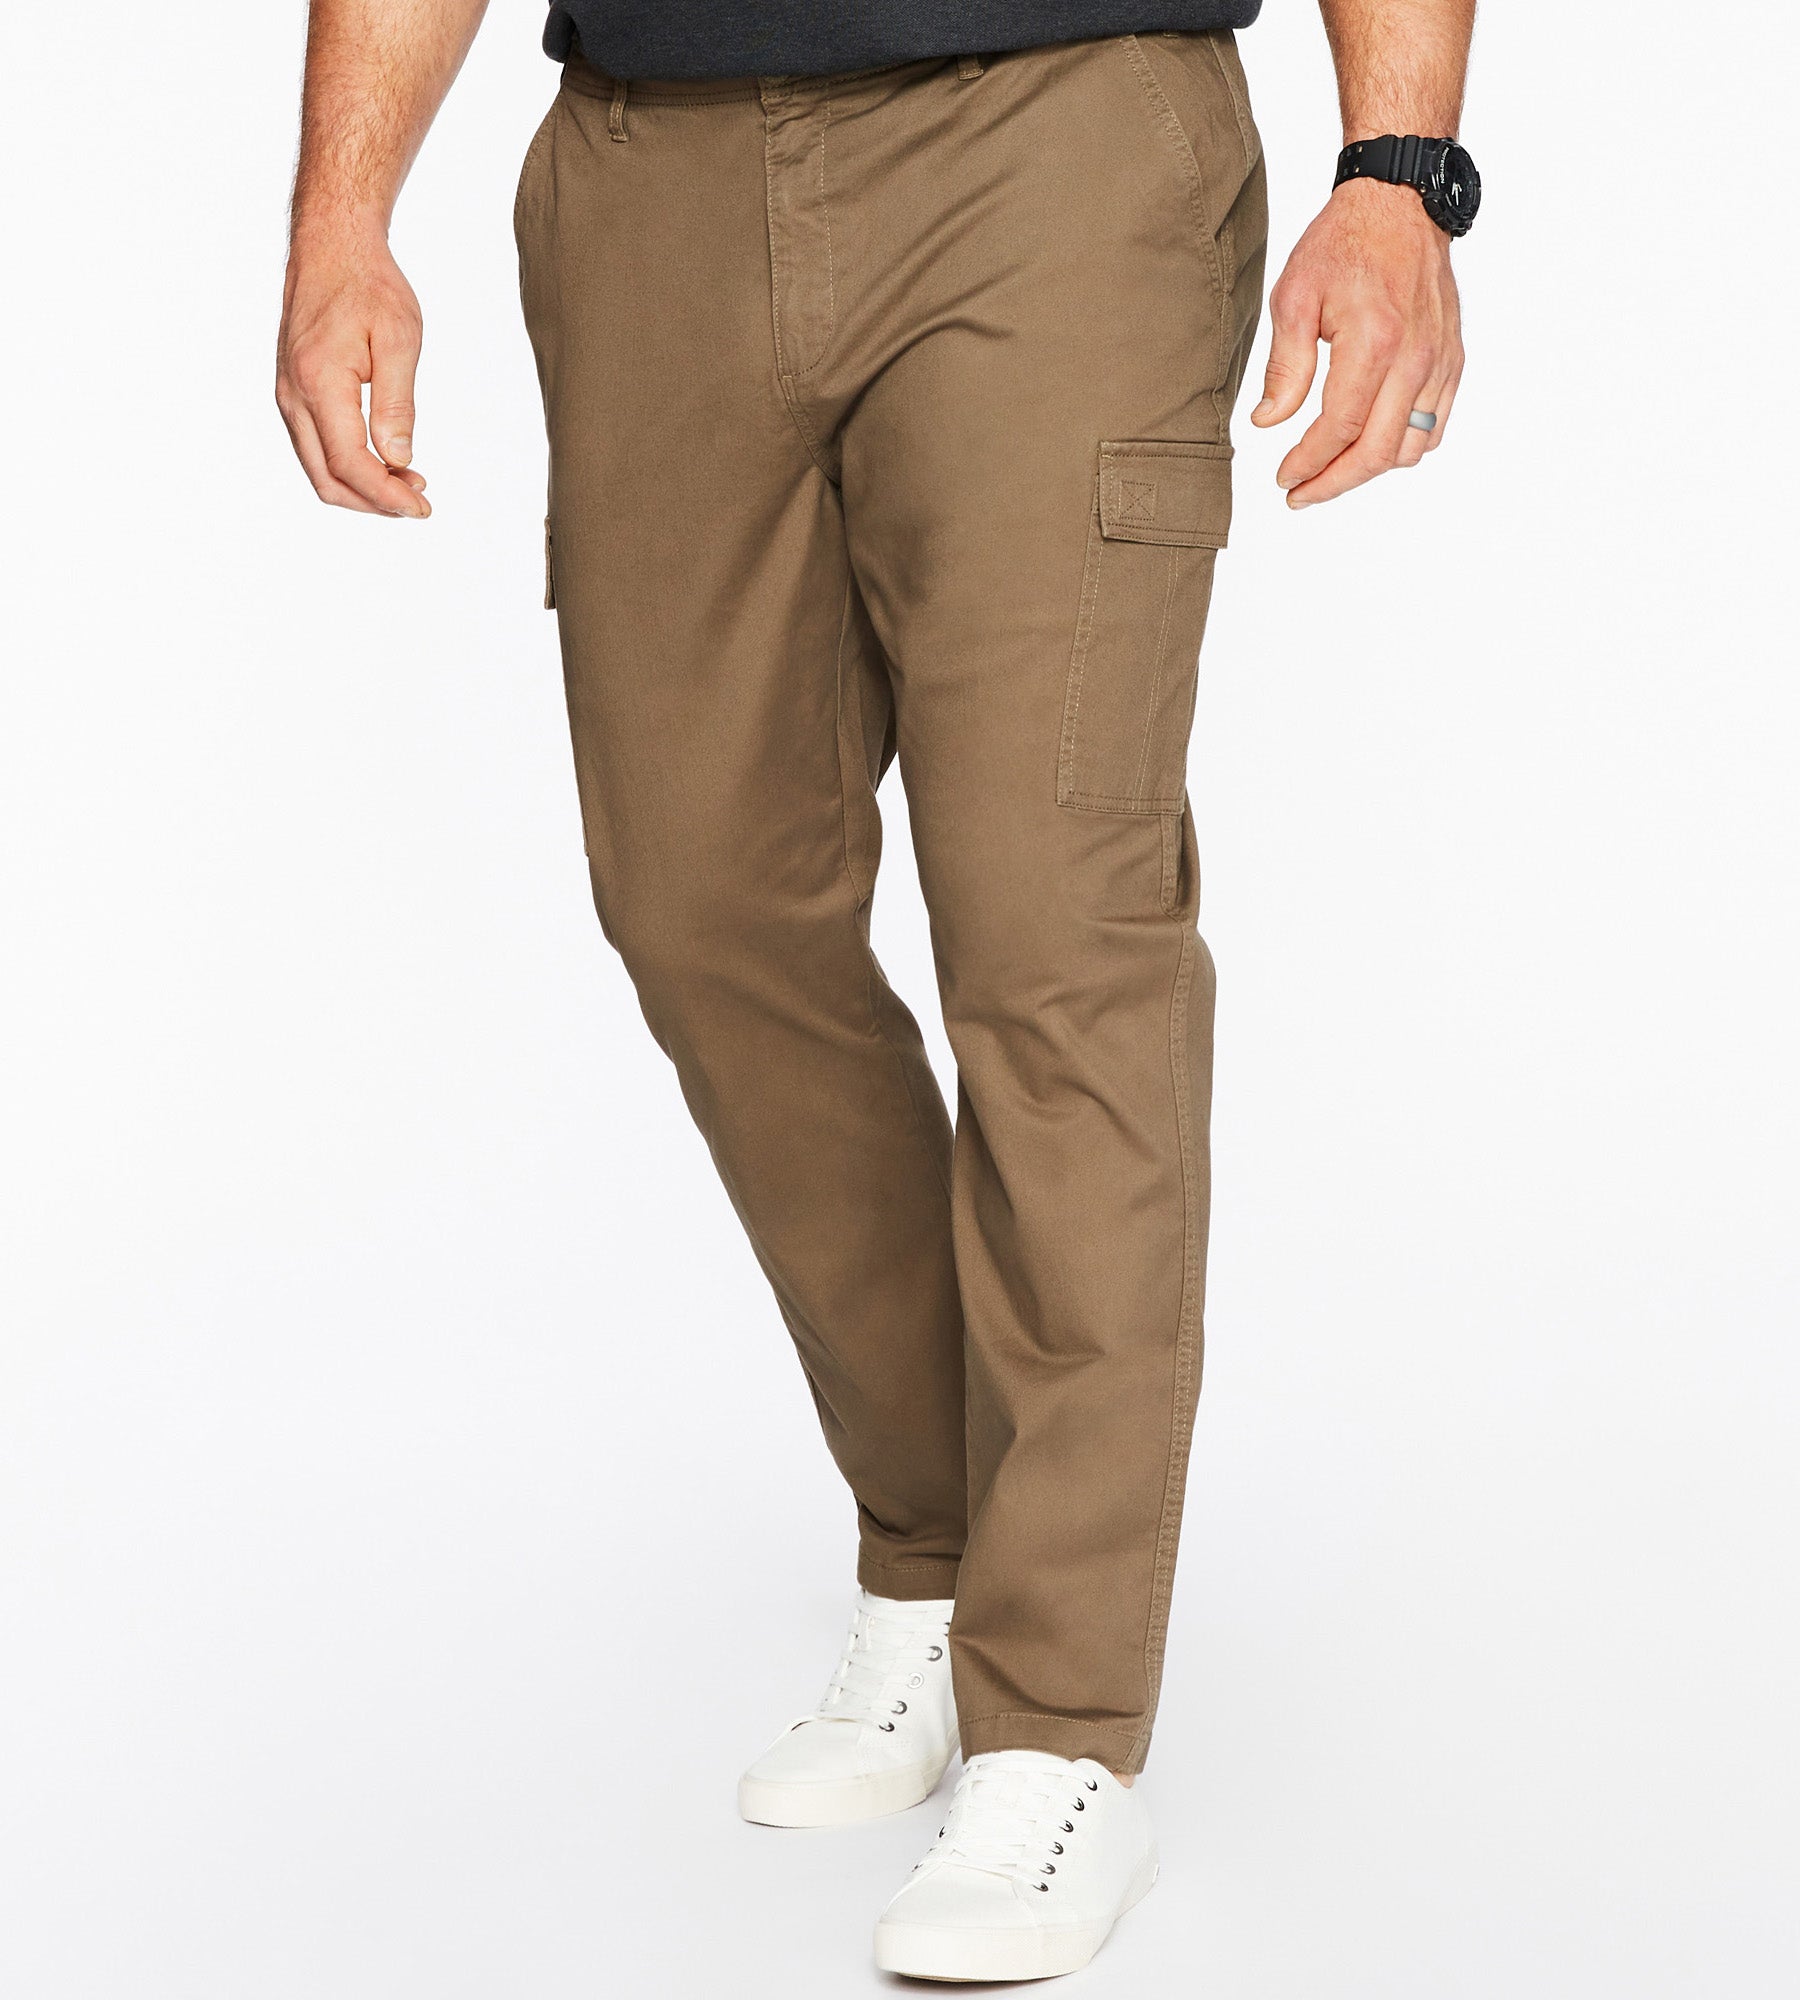 Standard Wide Stretchy Cargo Ankle-Pants 344